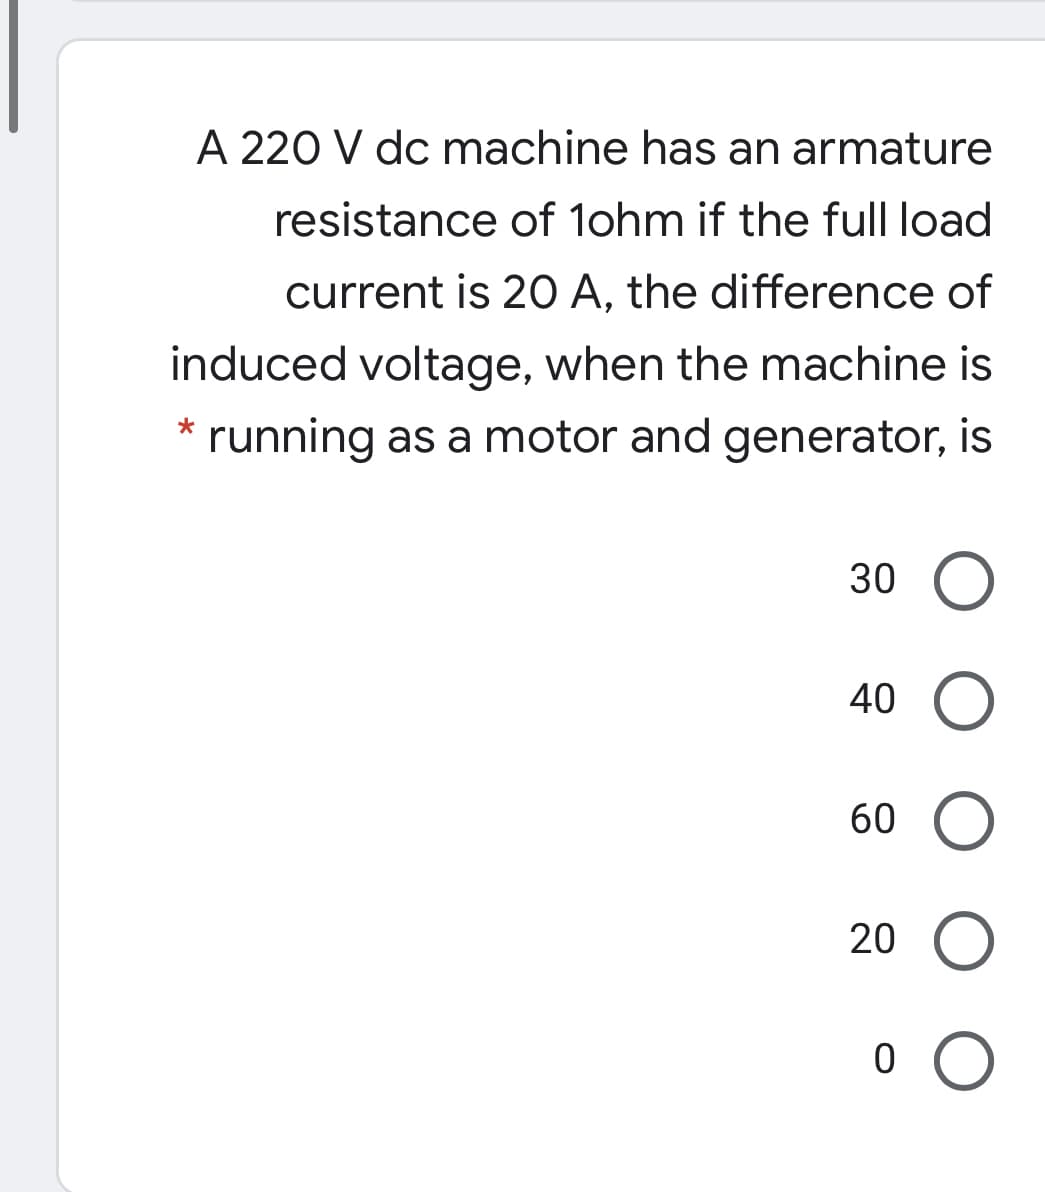 A 220 V dc machine has an armature
resistance of 1ohm if the full load
current is 20 A, the difference of
induced voltage, when the machine is
* running as a motor and generator, is
30
40
60
20
